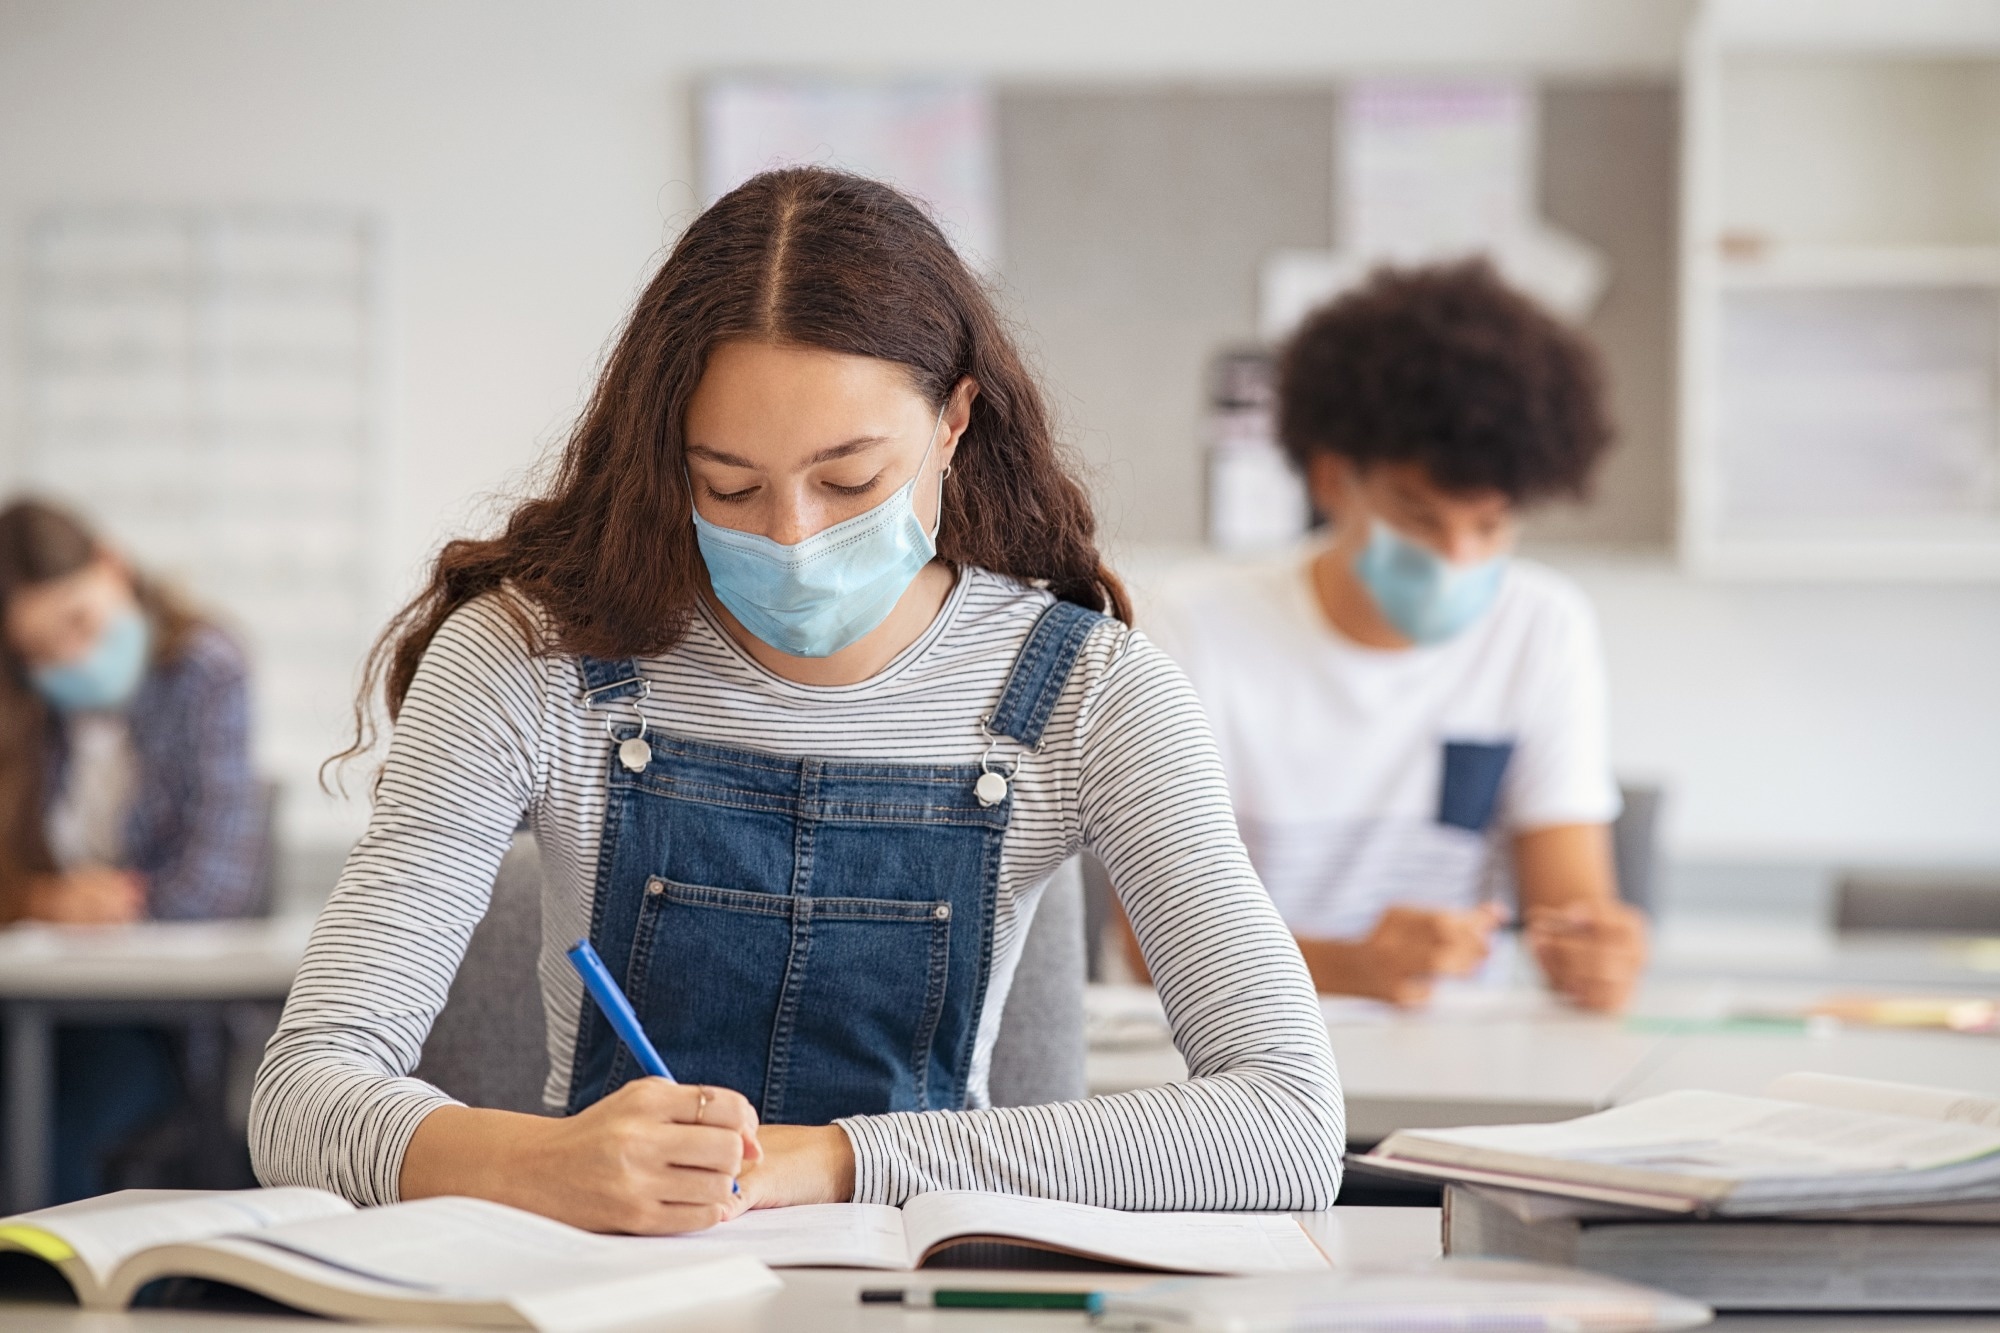 Study: Natural course of health and well-being in non-hospitalised children and young people after testing for SARS-CoV-2: A prospective follow-up study over 12 months. Image Credit: Ground Picture/Shutterstock